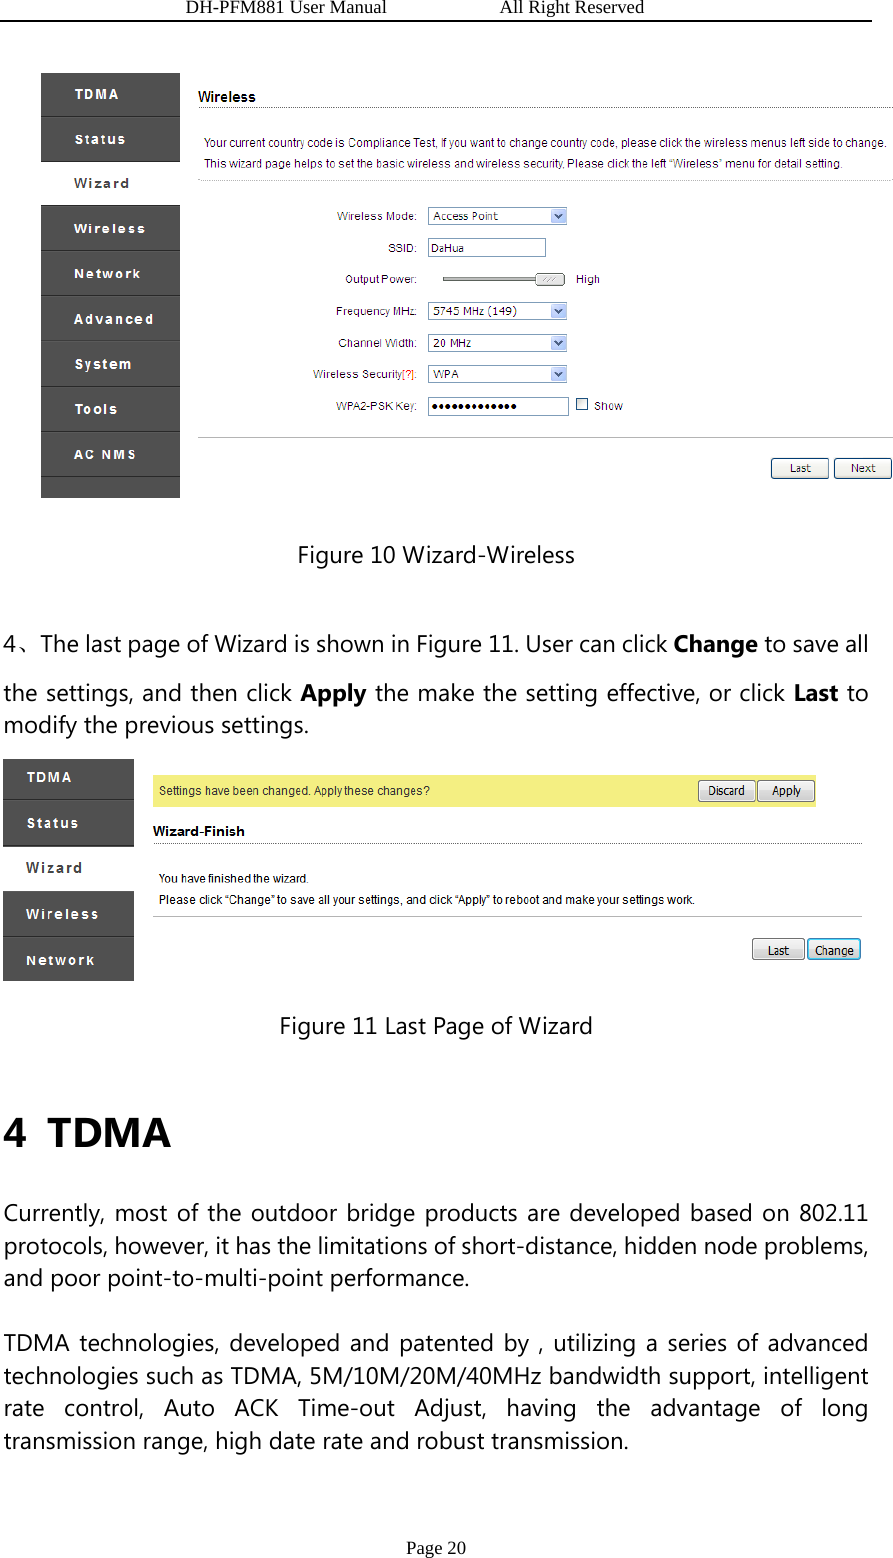                   DH-PFM881 User Manual            All Right Reserved Page 20  Figure 10 Wizard-Wireless 4、The last page of Wizard is shown in Figure 11. User can click Change to save all the settings, and then click Apply the make the setting effective, or click Last to modify the previous settings.  Figure 11 Last Page of Wizard  4 TDMA Currently, most of the outdoor bridge products are developed based on 802.11 protocols, however, it has the limitations of short-distance, hidden node problems, and poor point-to-multi-point performance.   TDMA technologies, developed and patented by , utilizing a series of advanced technologies such as TDMA, 5M/10M/20M/40MHz bandwidth support, intelligent rate control, Auto ACK Time-out Adjust, having the advantage of long transmission range, high date rate and robust transmission. 